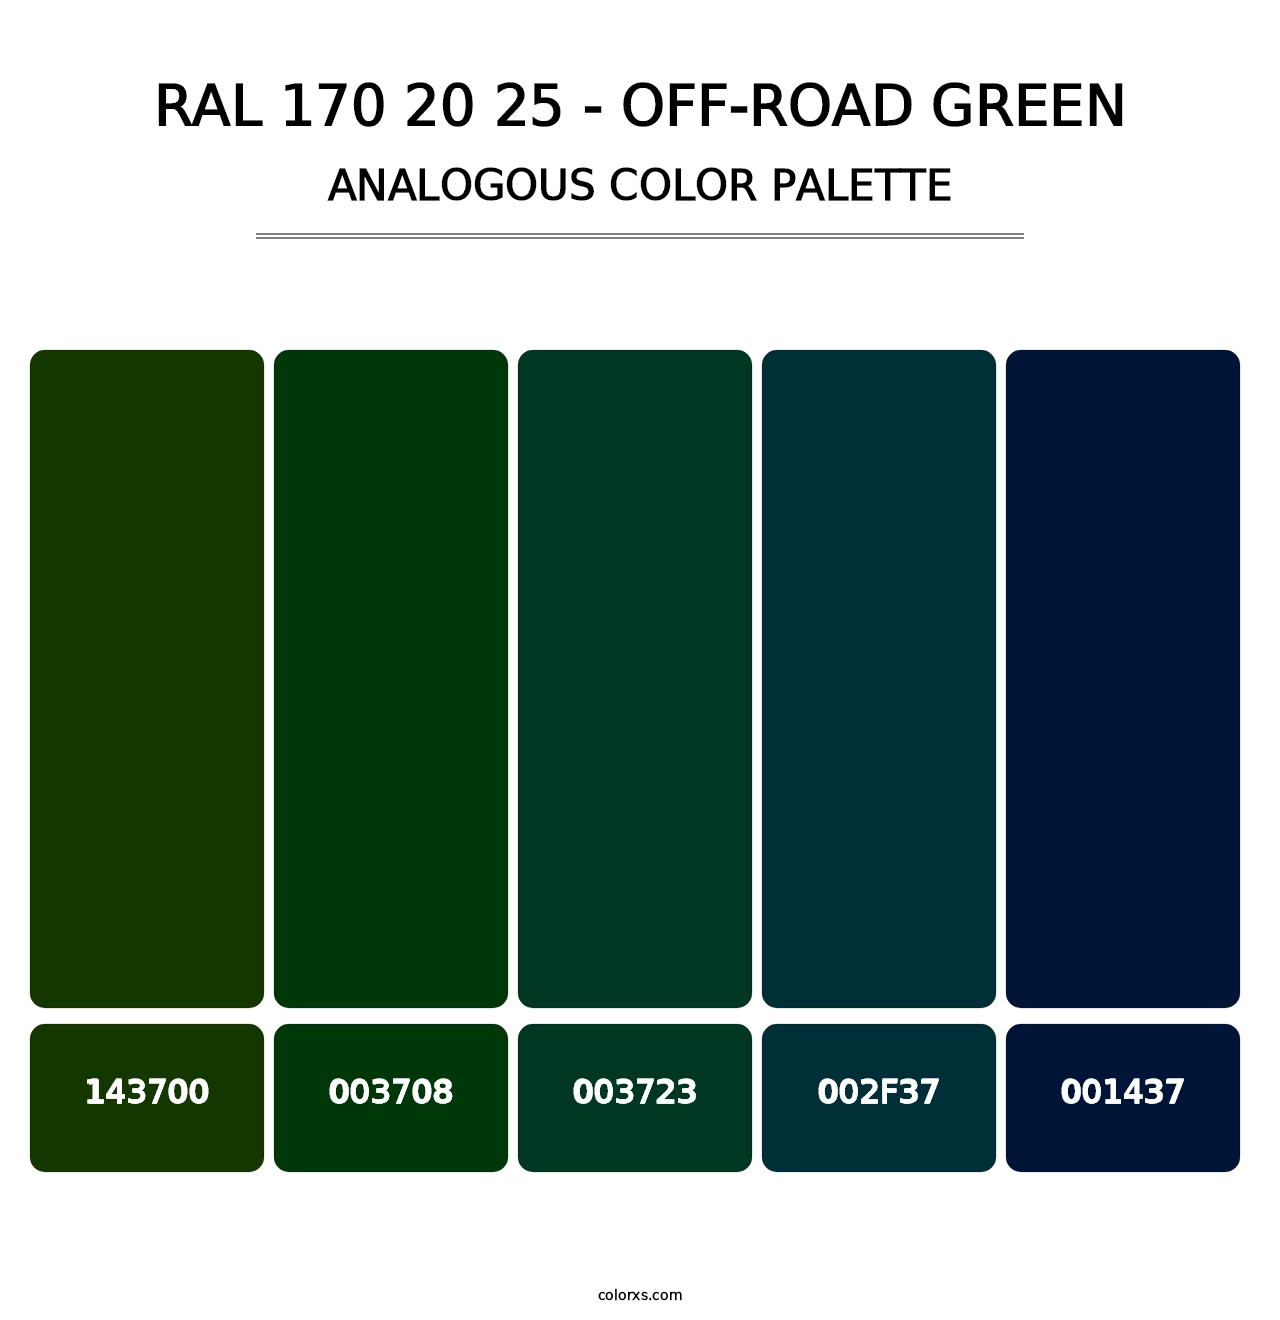 RAL 170 20 25 - Off-Road Green - Analogous Color Palette